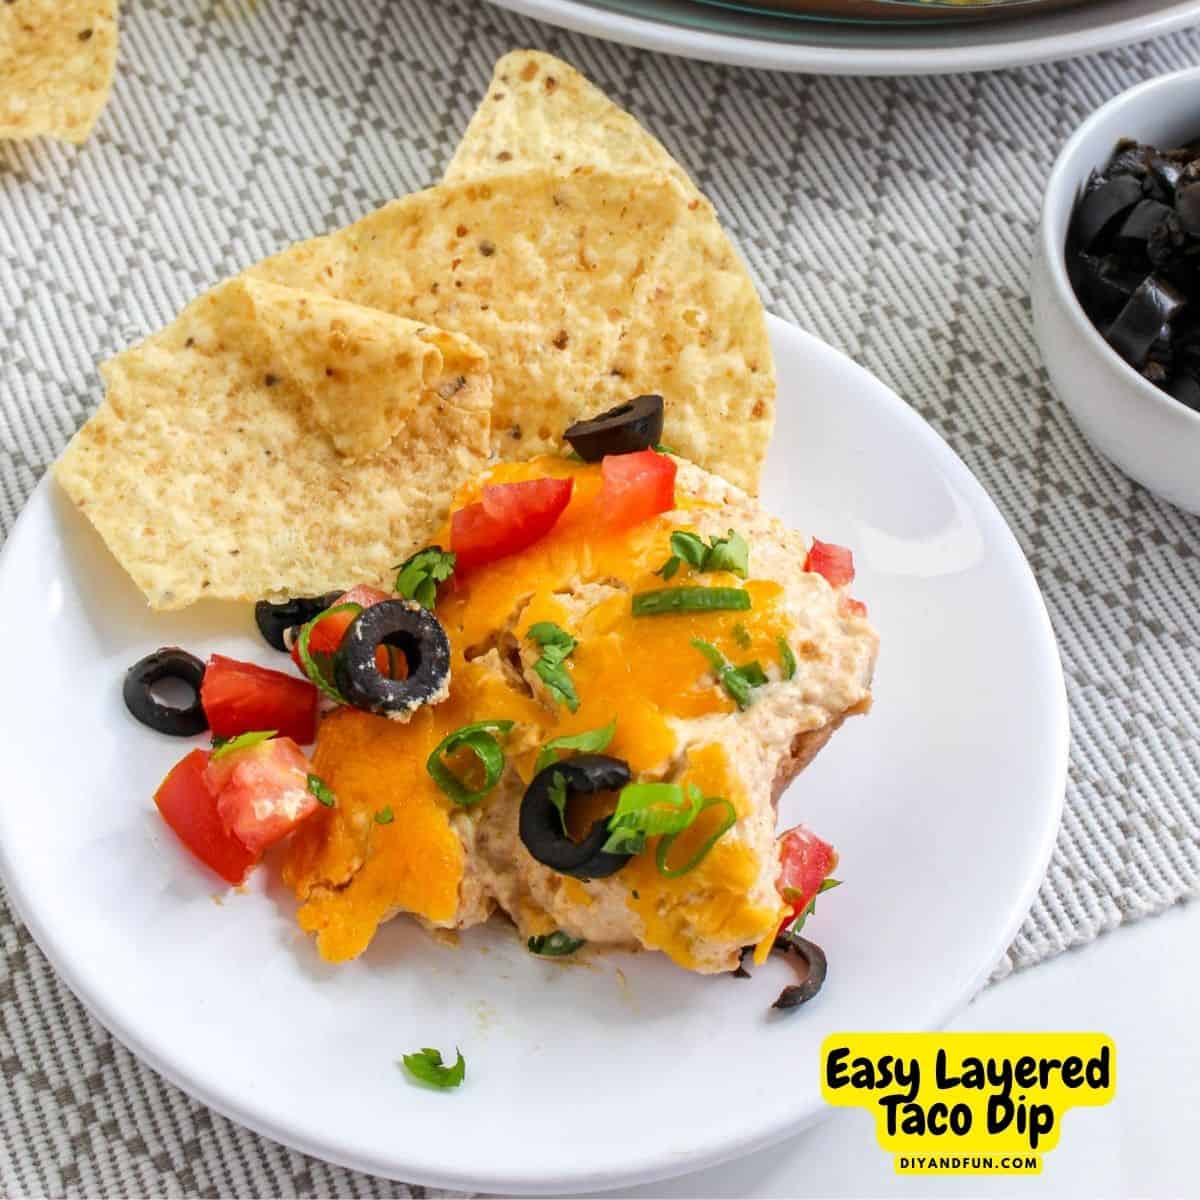 Easy Layered Taco Dip Recipe, a quick, simple and flavorful warm appetizer recipe that is perfect with tortilla chips or fresh vegetables